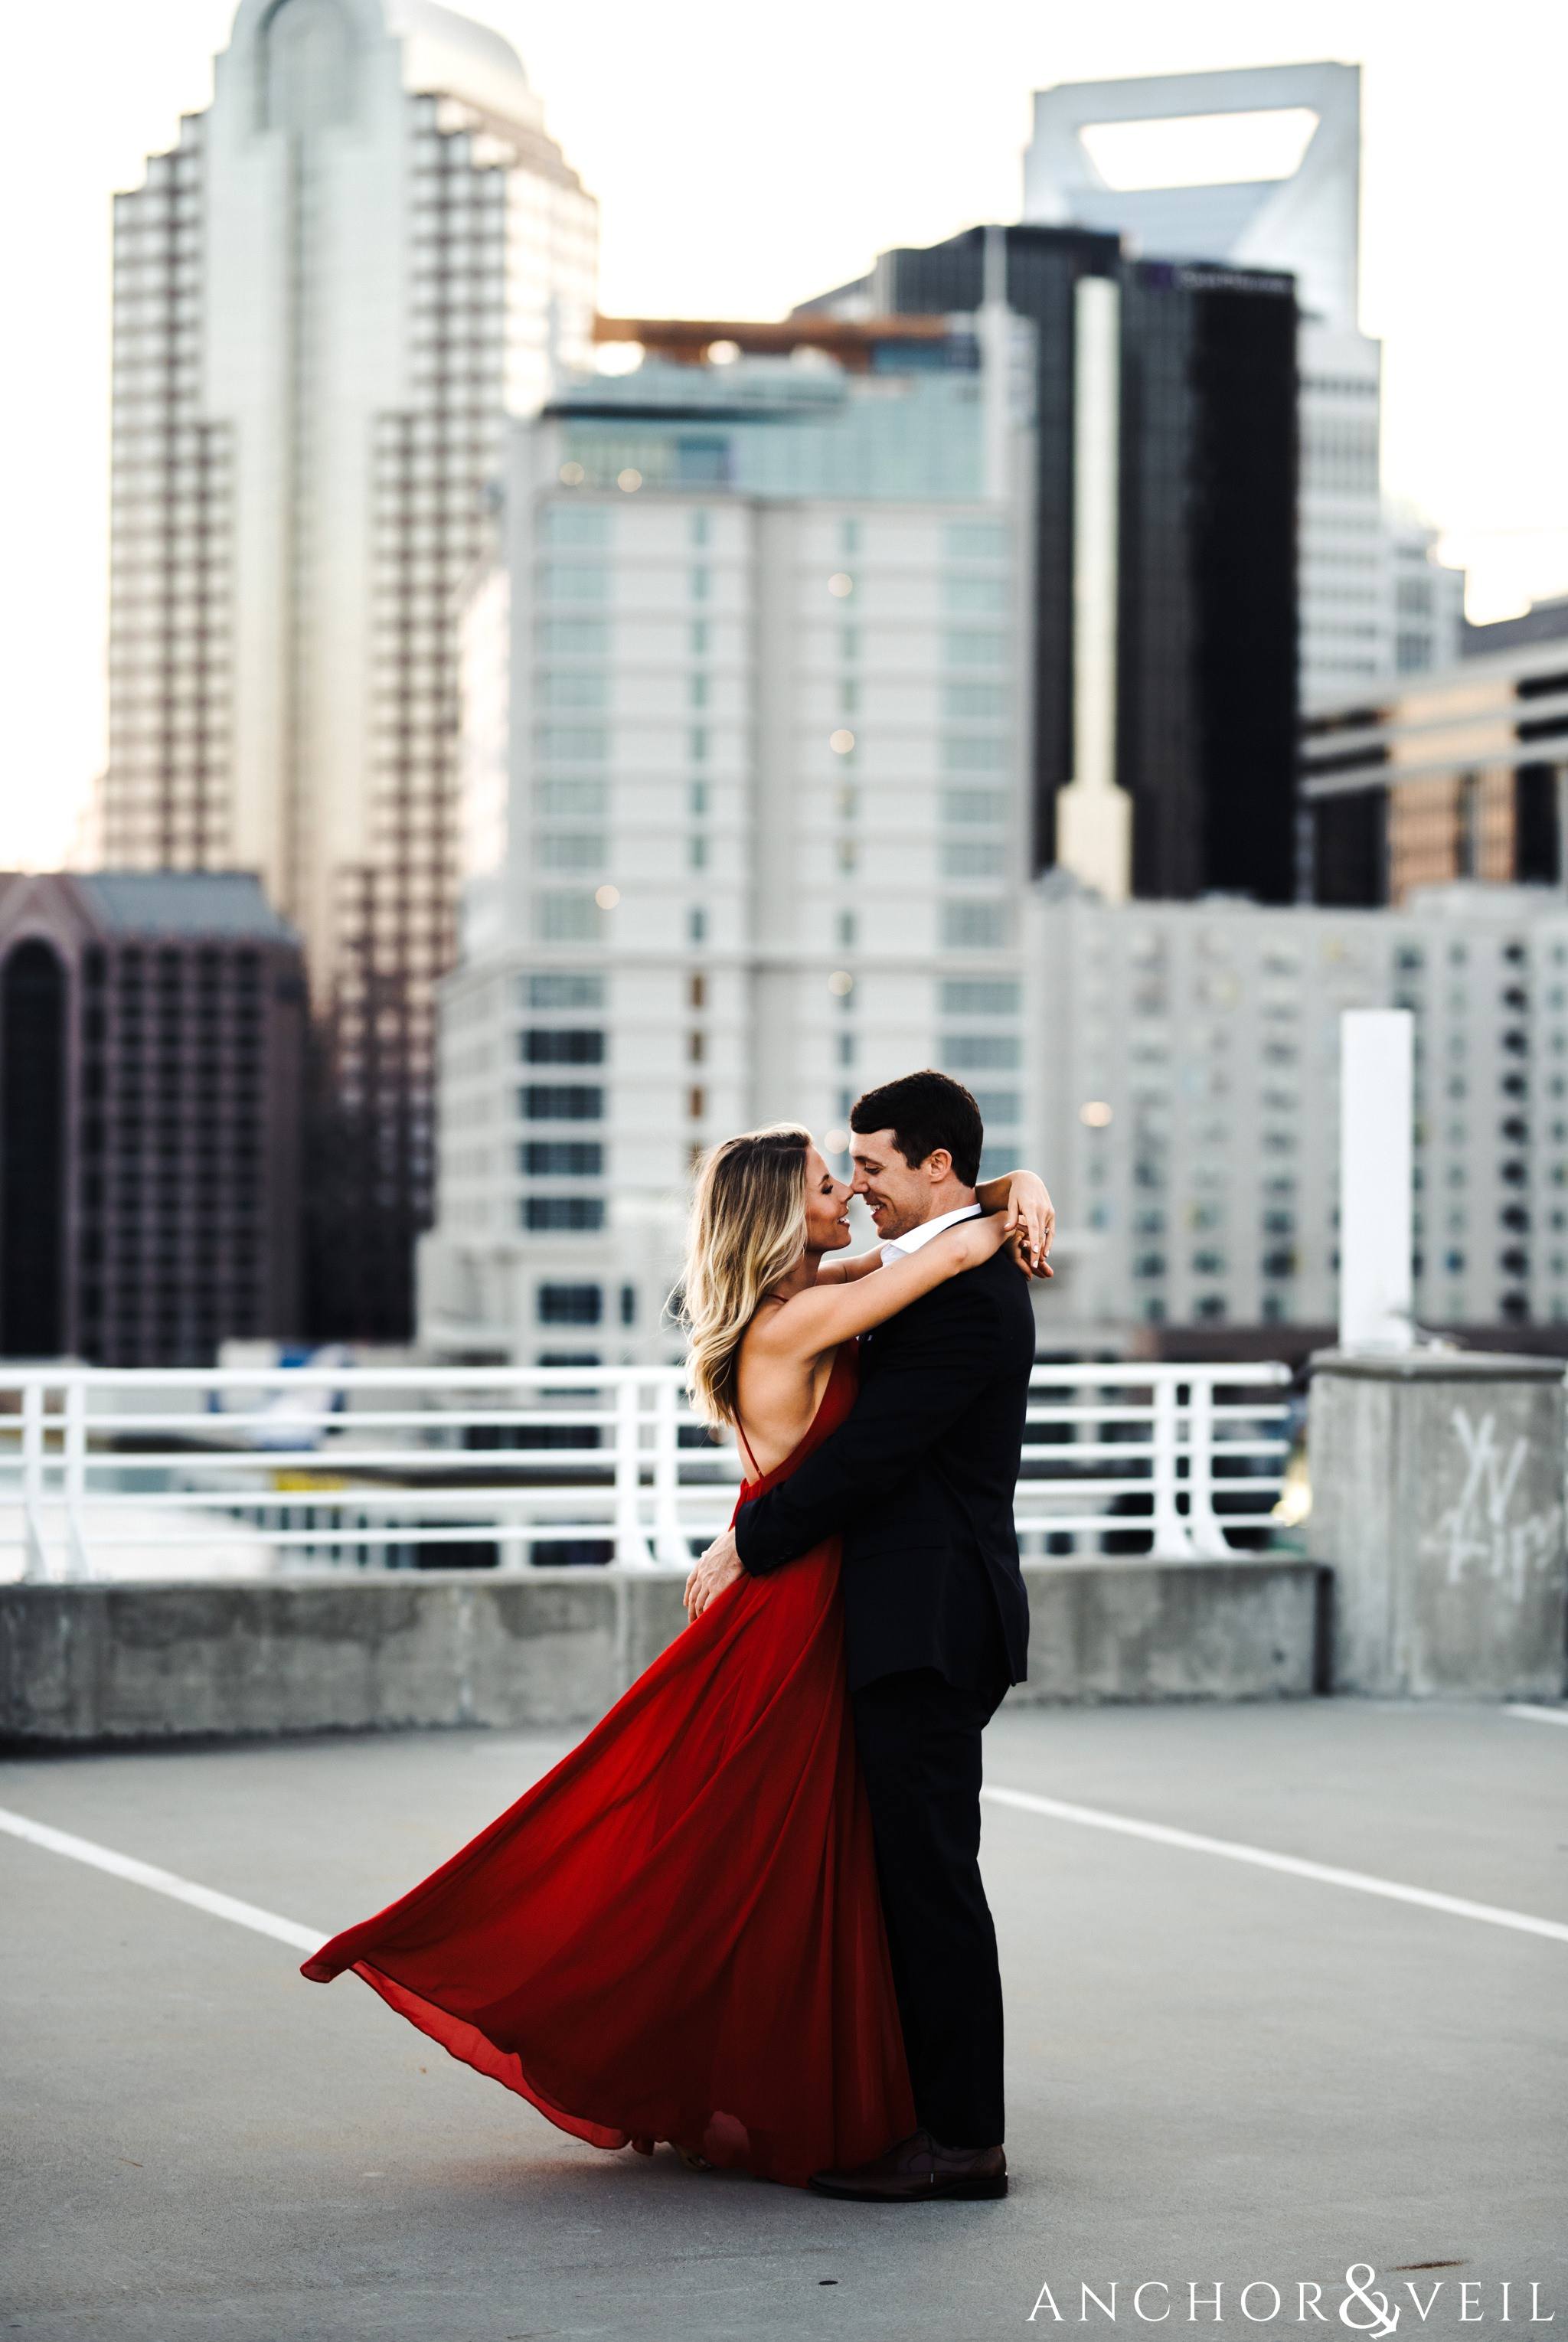 bringing her close in her red dress and his suit with the skyline uptown Charlotte engagement session